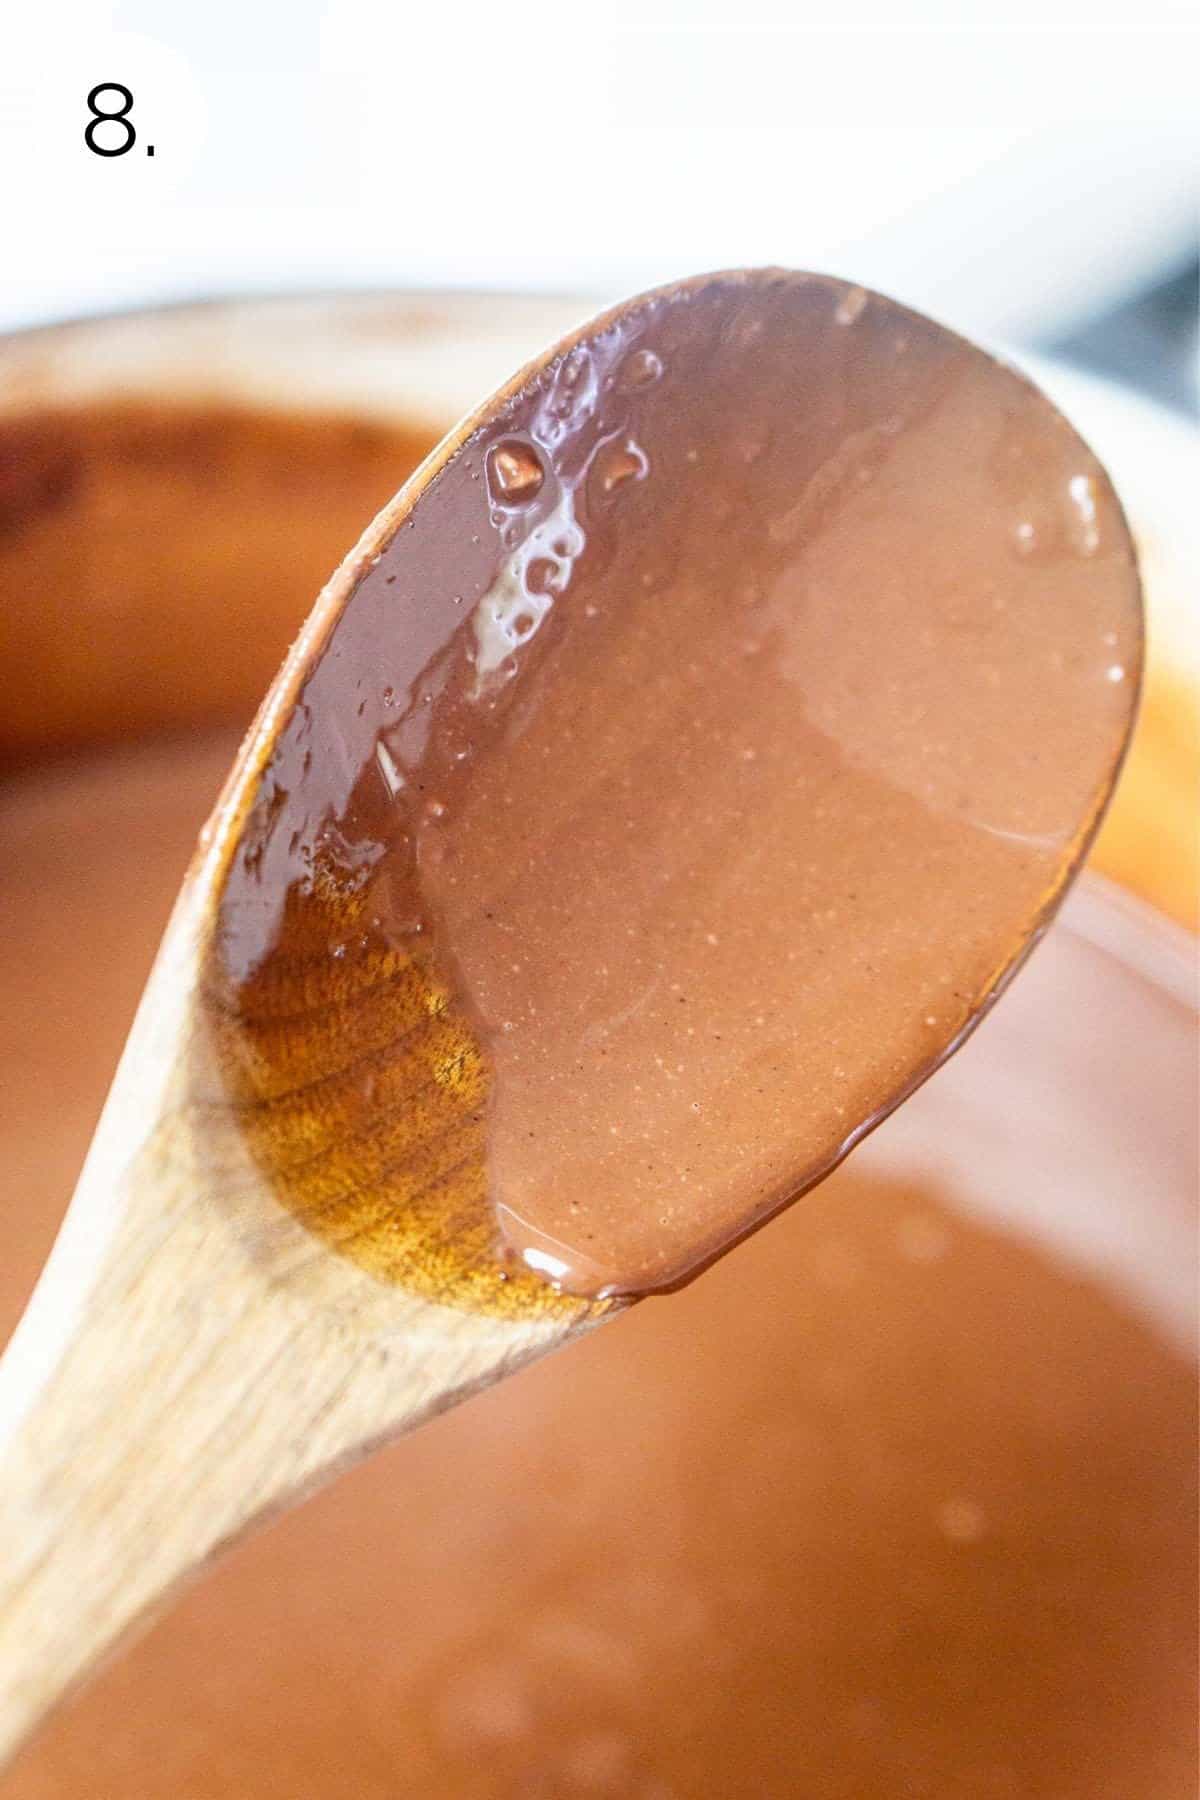 The ice cream mixture covering a wooden spoon after thickening.